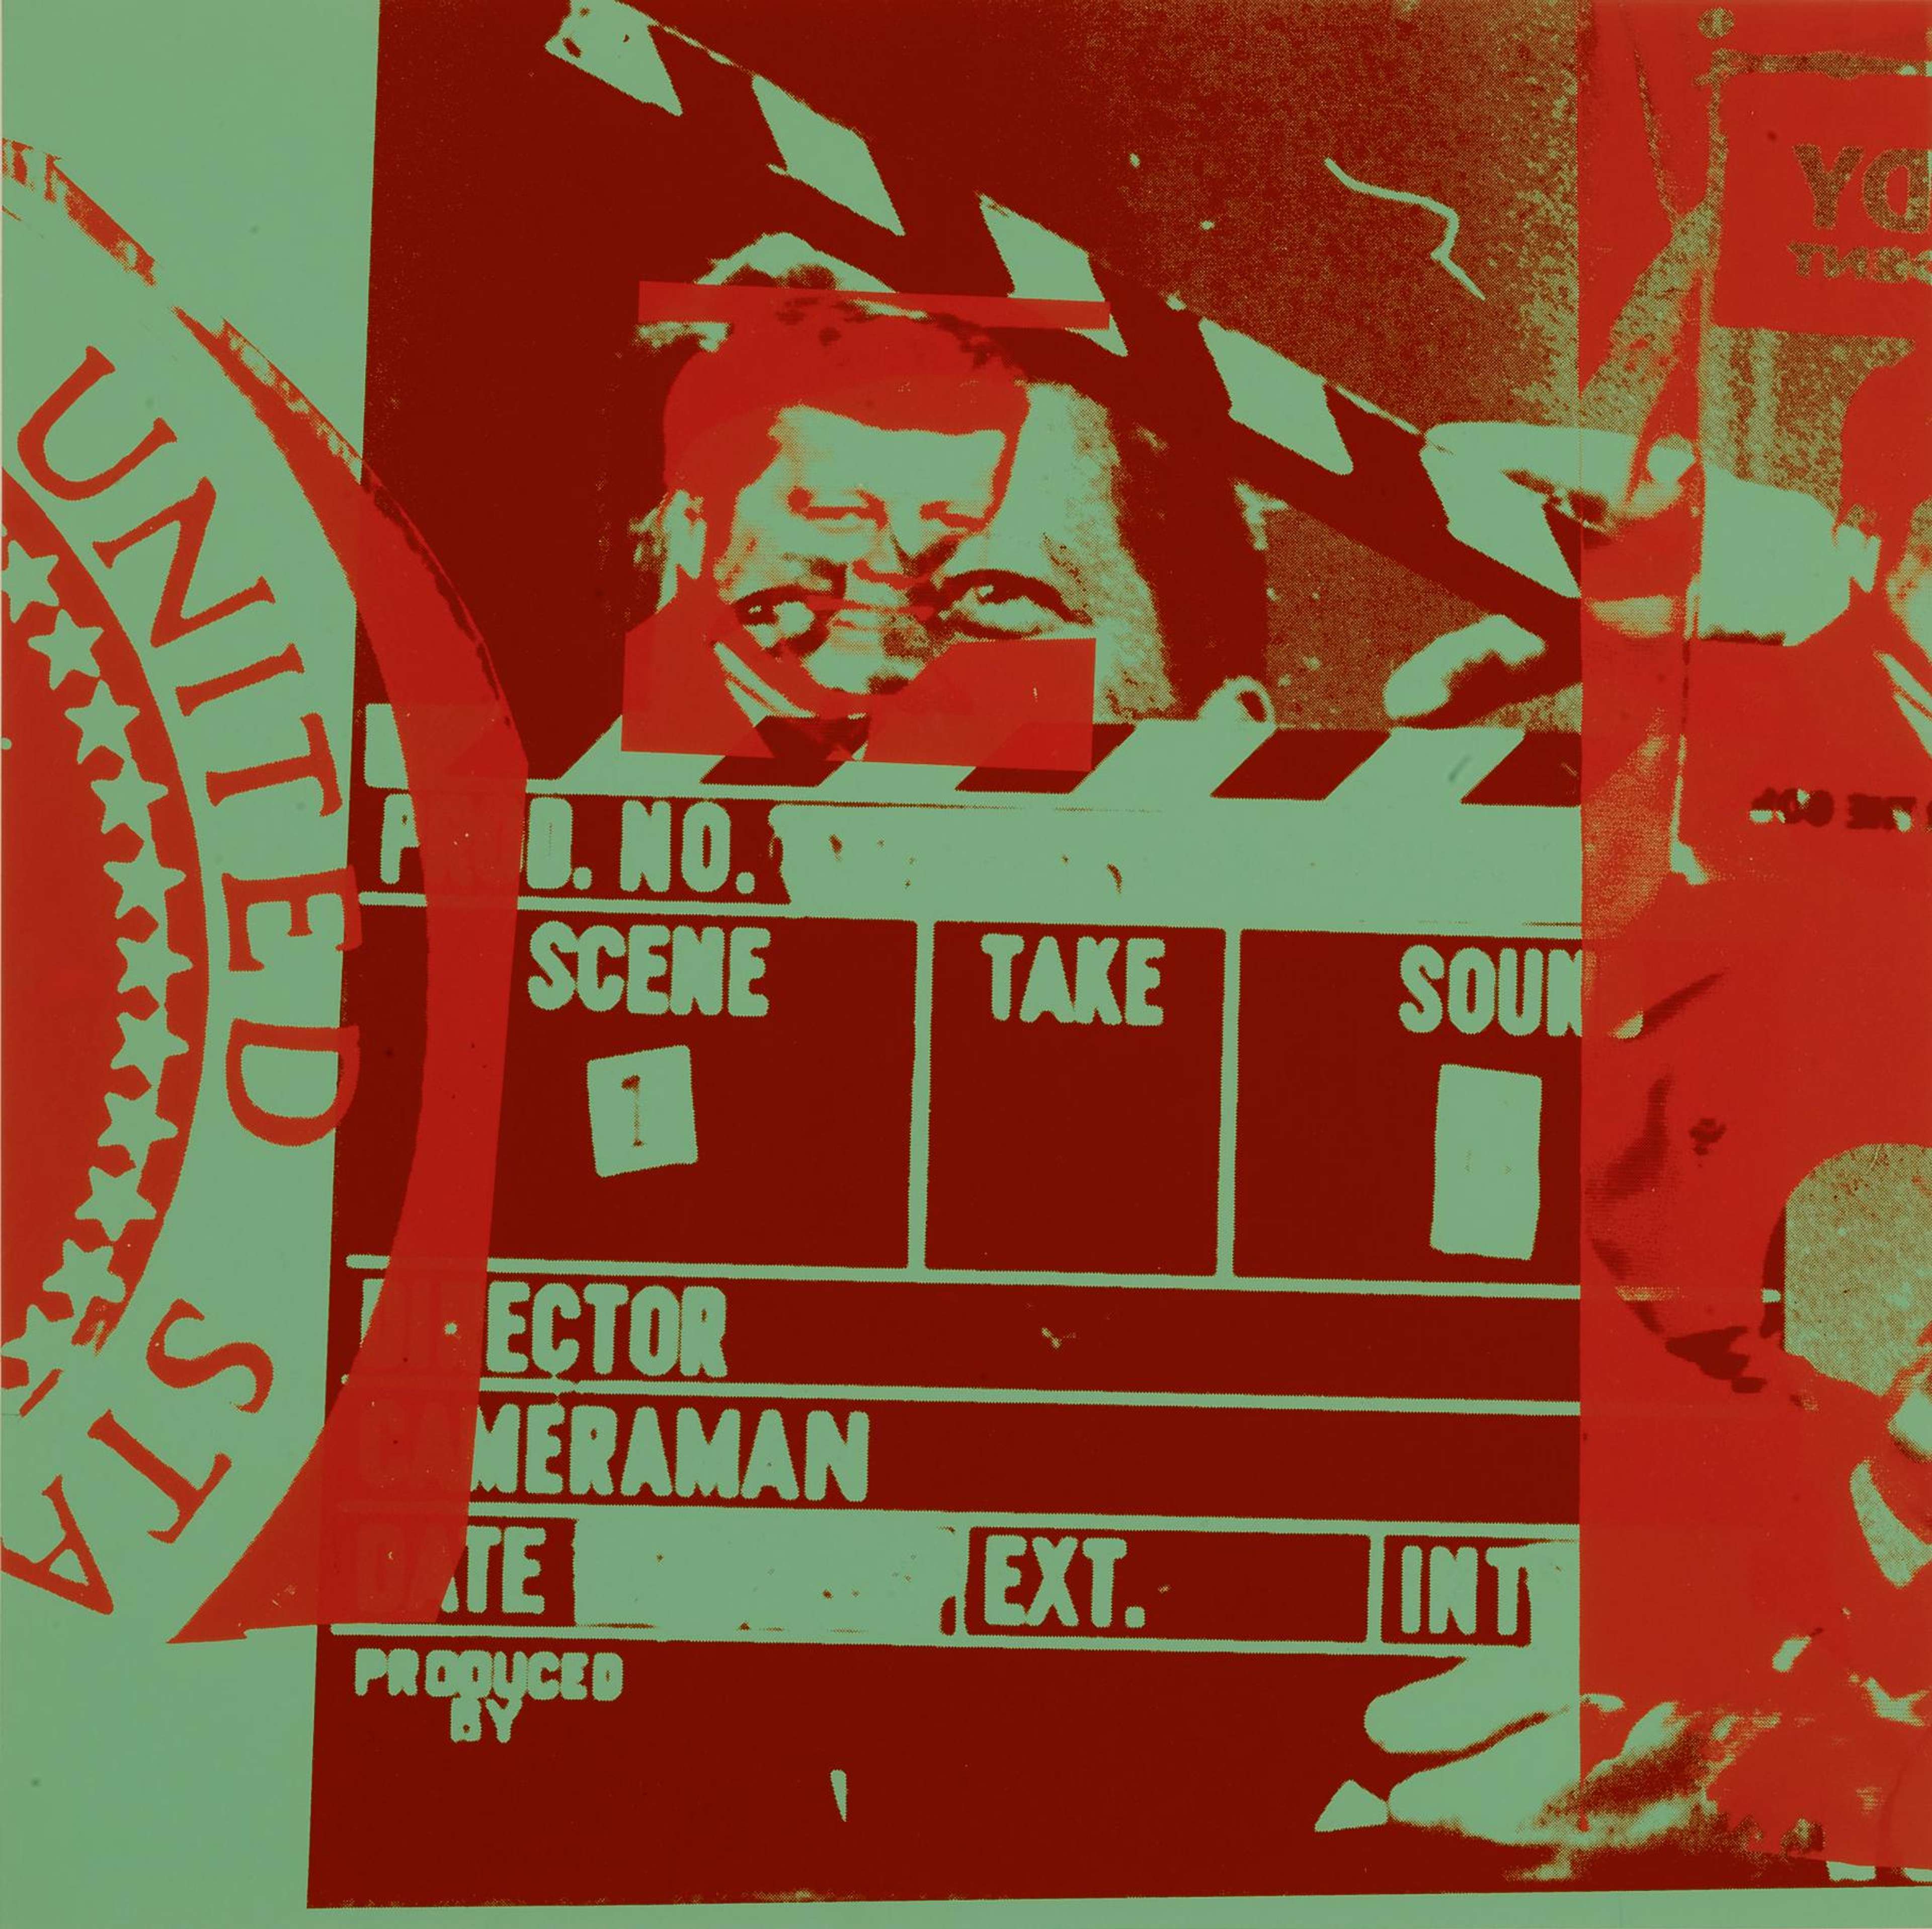 The print shows interlaced images of the president’s portrait, a film clapperboard and the presidential seal. It is depicted in bright red and pale green.